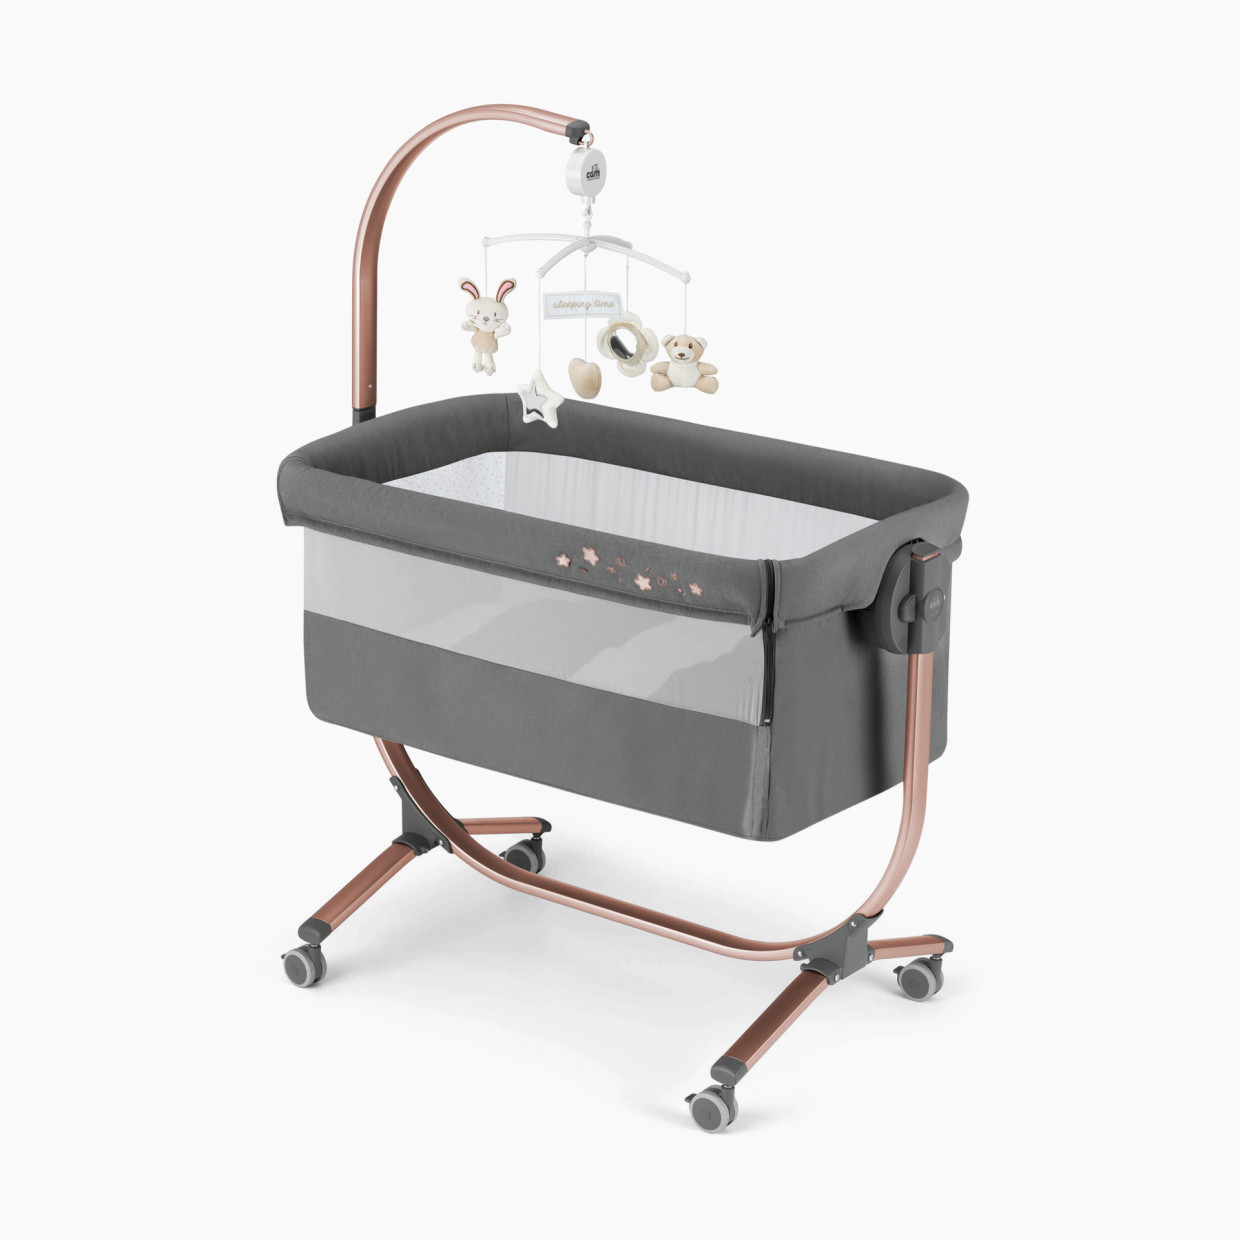 Sorelle Cullami Bassinet and Co-Sleeper - Rose Gold/Gray.